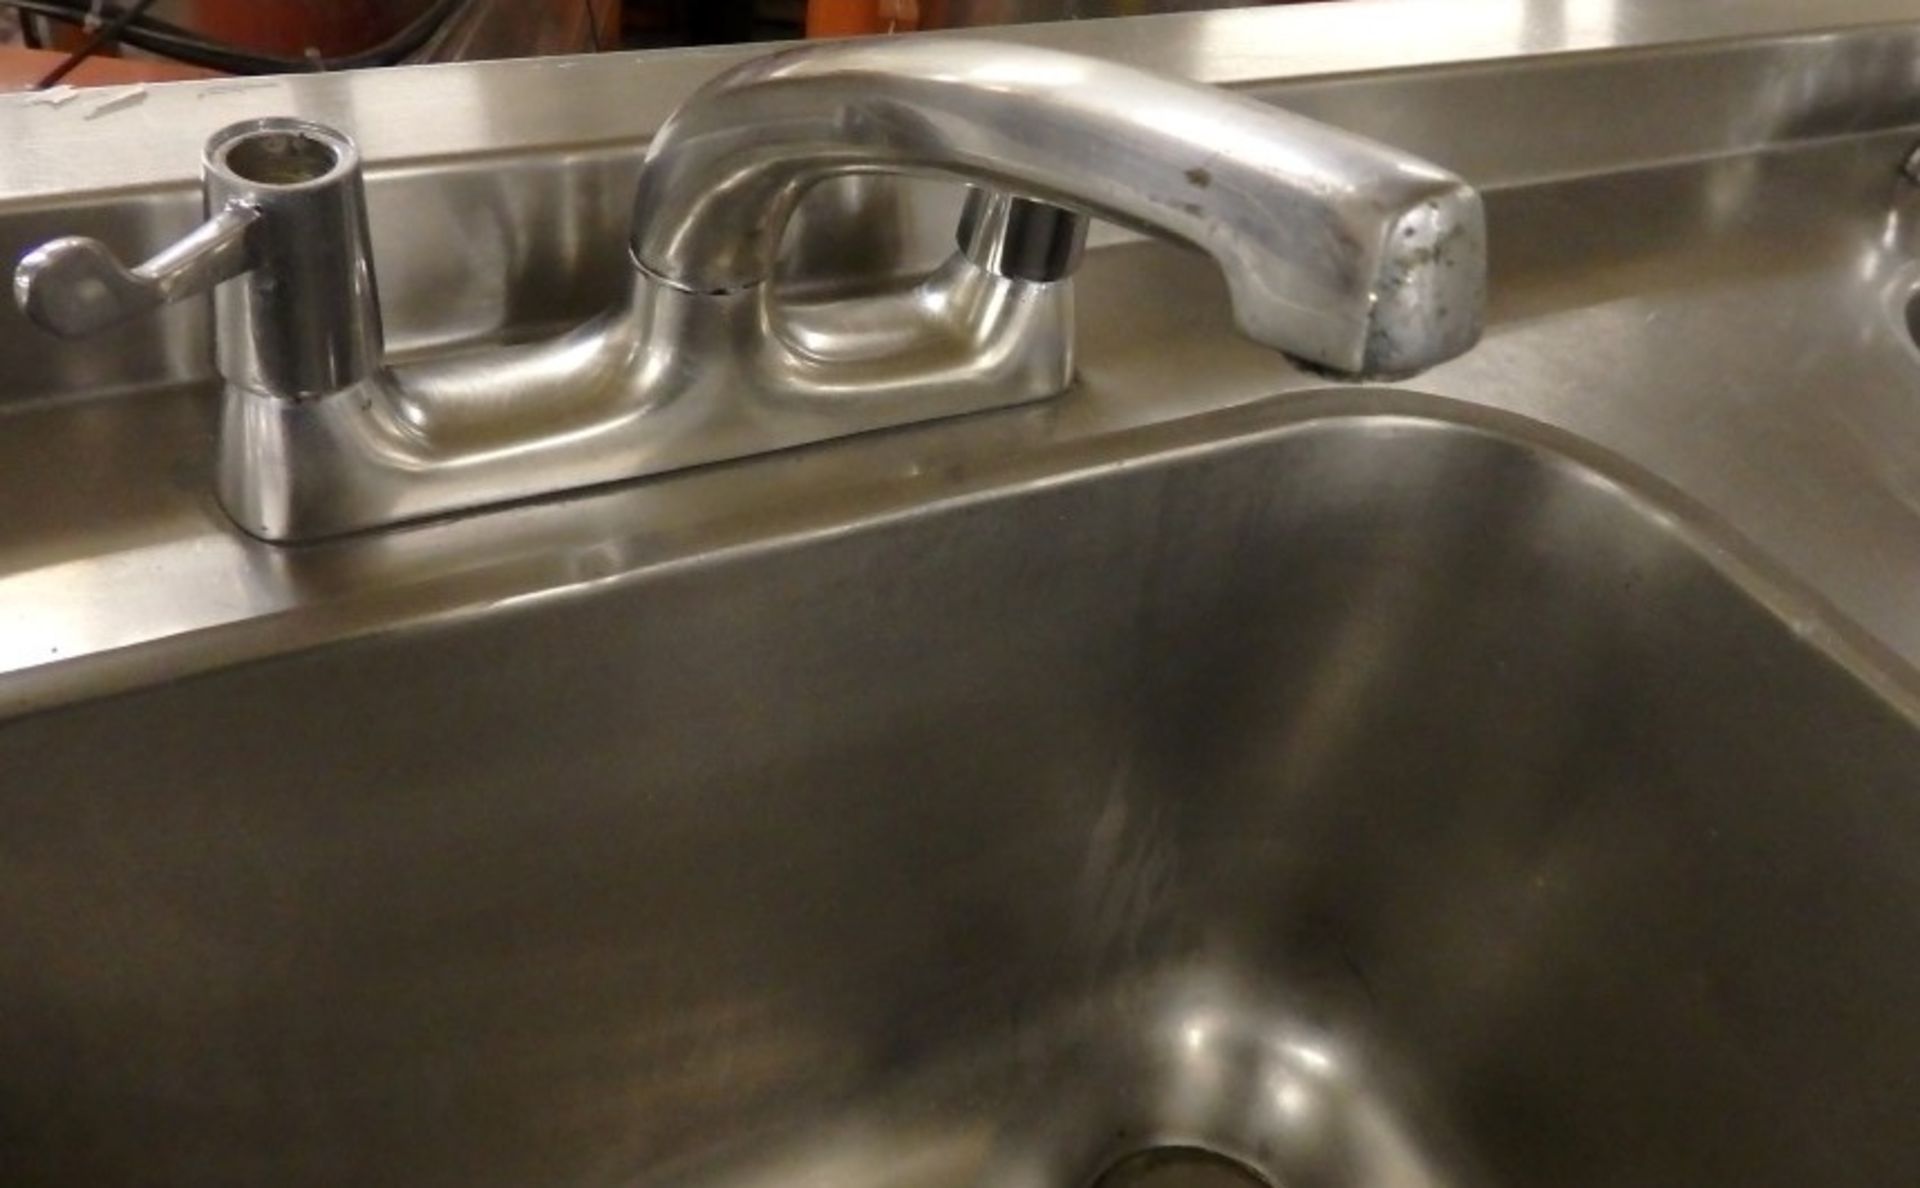 1 x Large Triple Bowl Stainless Steel Sink Unit, With 3-Door Storage - Dimensions: W272 x D65 x - Image 5 of 26